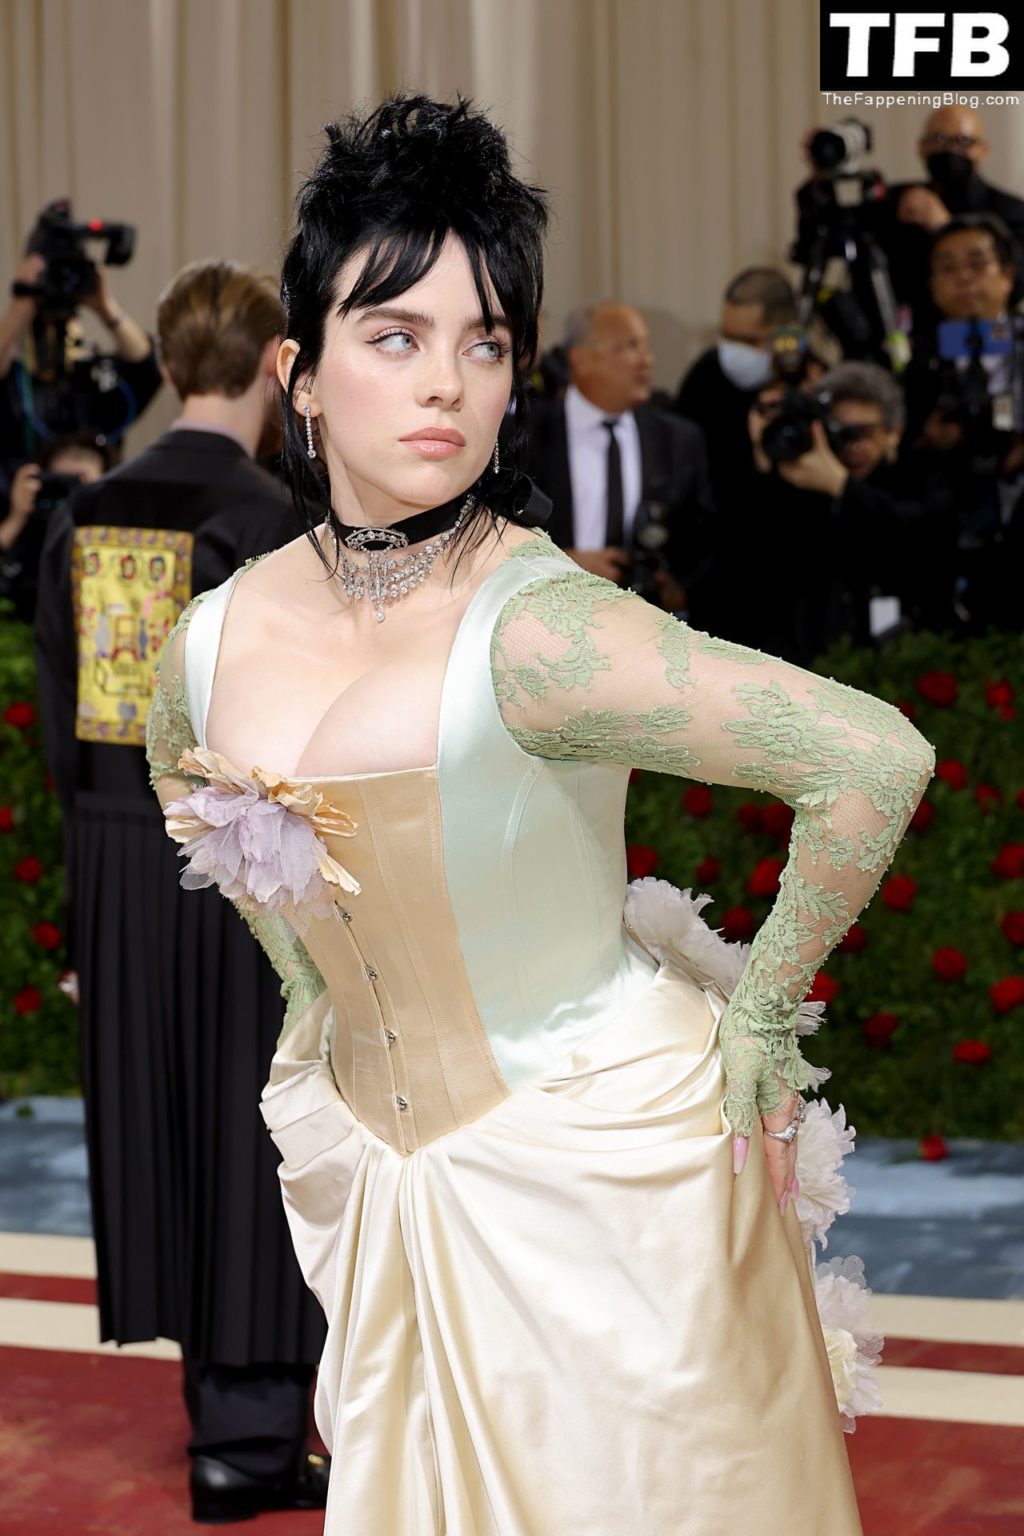 Billie Eilish Sexy The Fappening Blog 38 1024x1536 - Billie Eilish Showcases Nice Cleavage at The 2022 Met Gala in NYC (155 Photos)